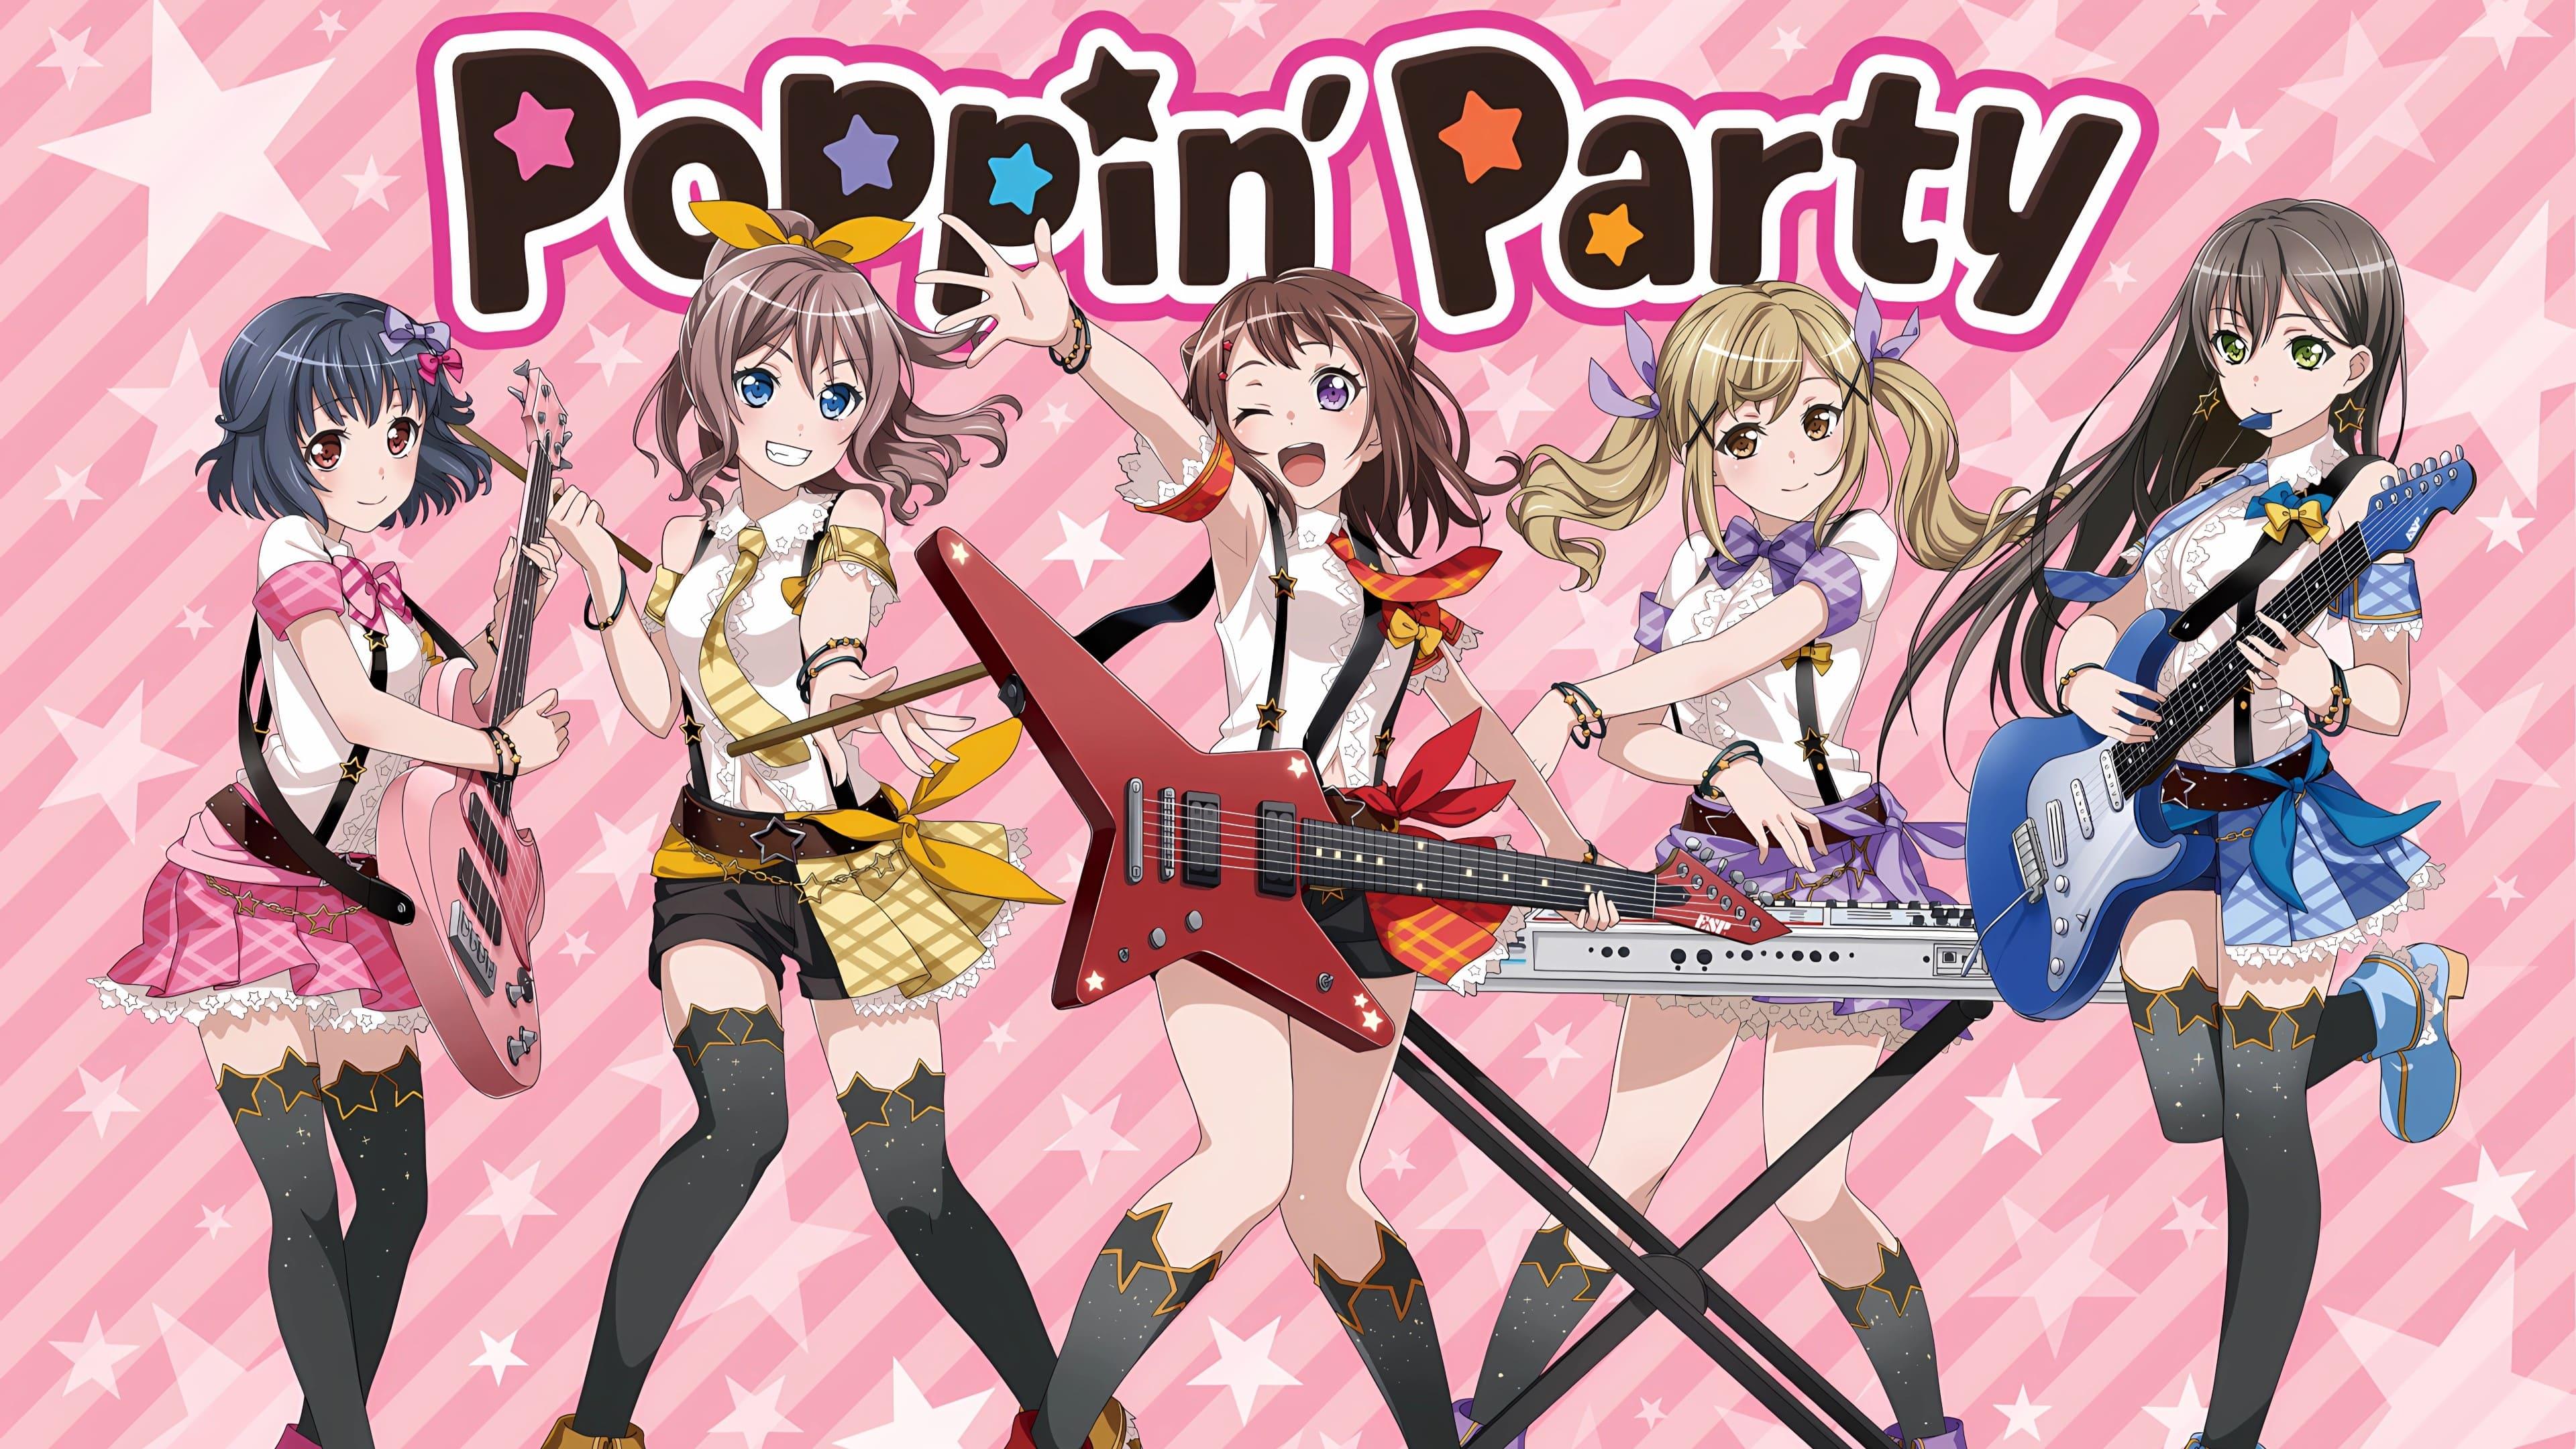 BanG Dream! 2nd☆LIVE Starrin'PARTY 2016! backdrop